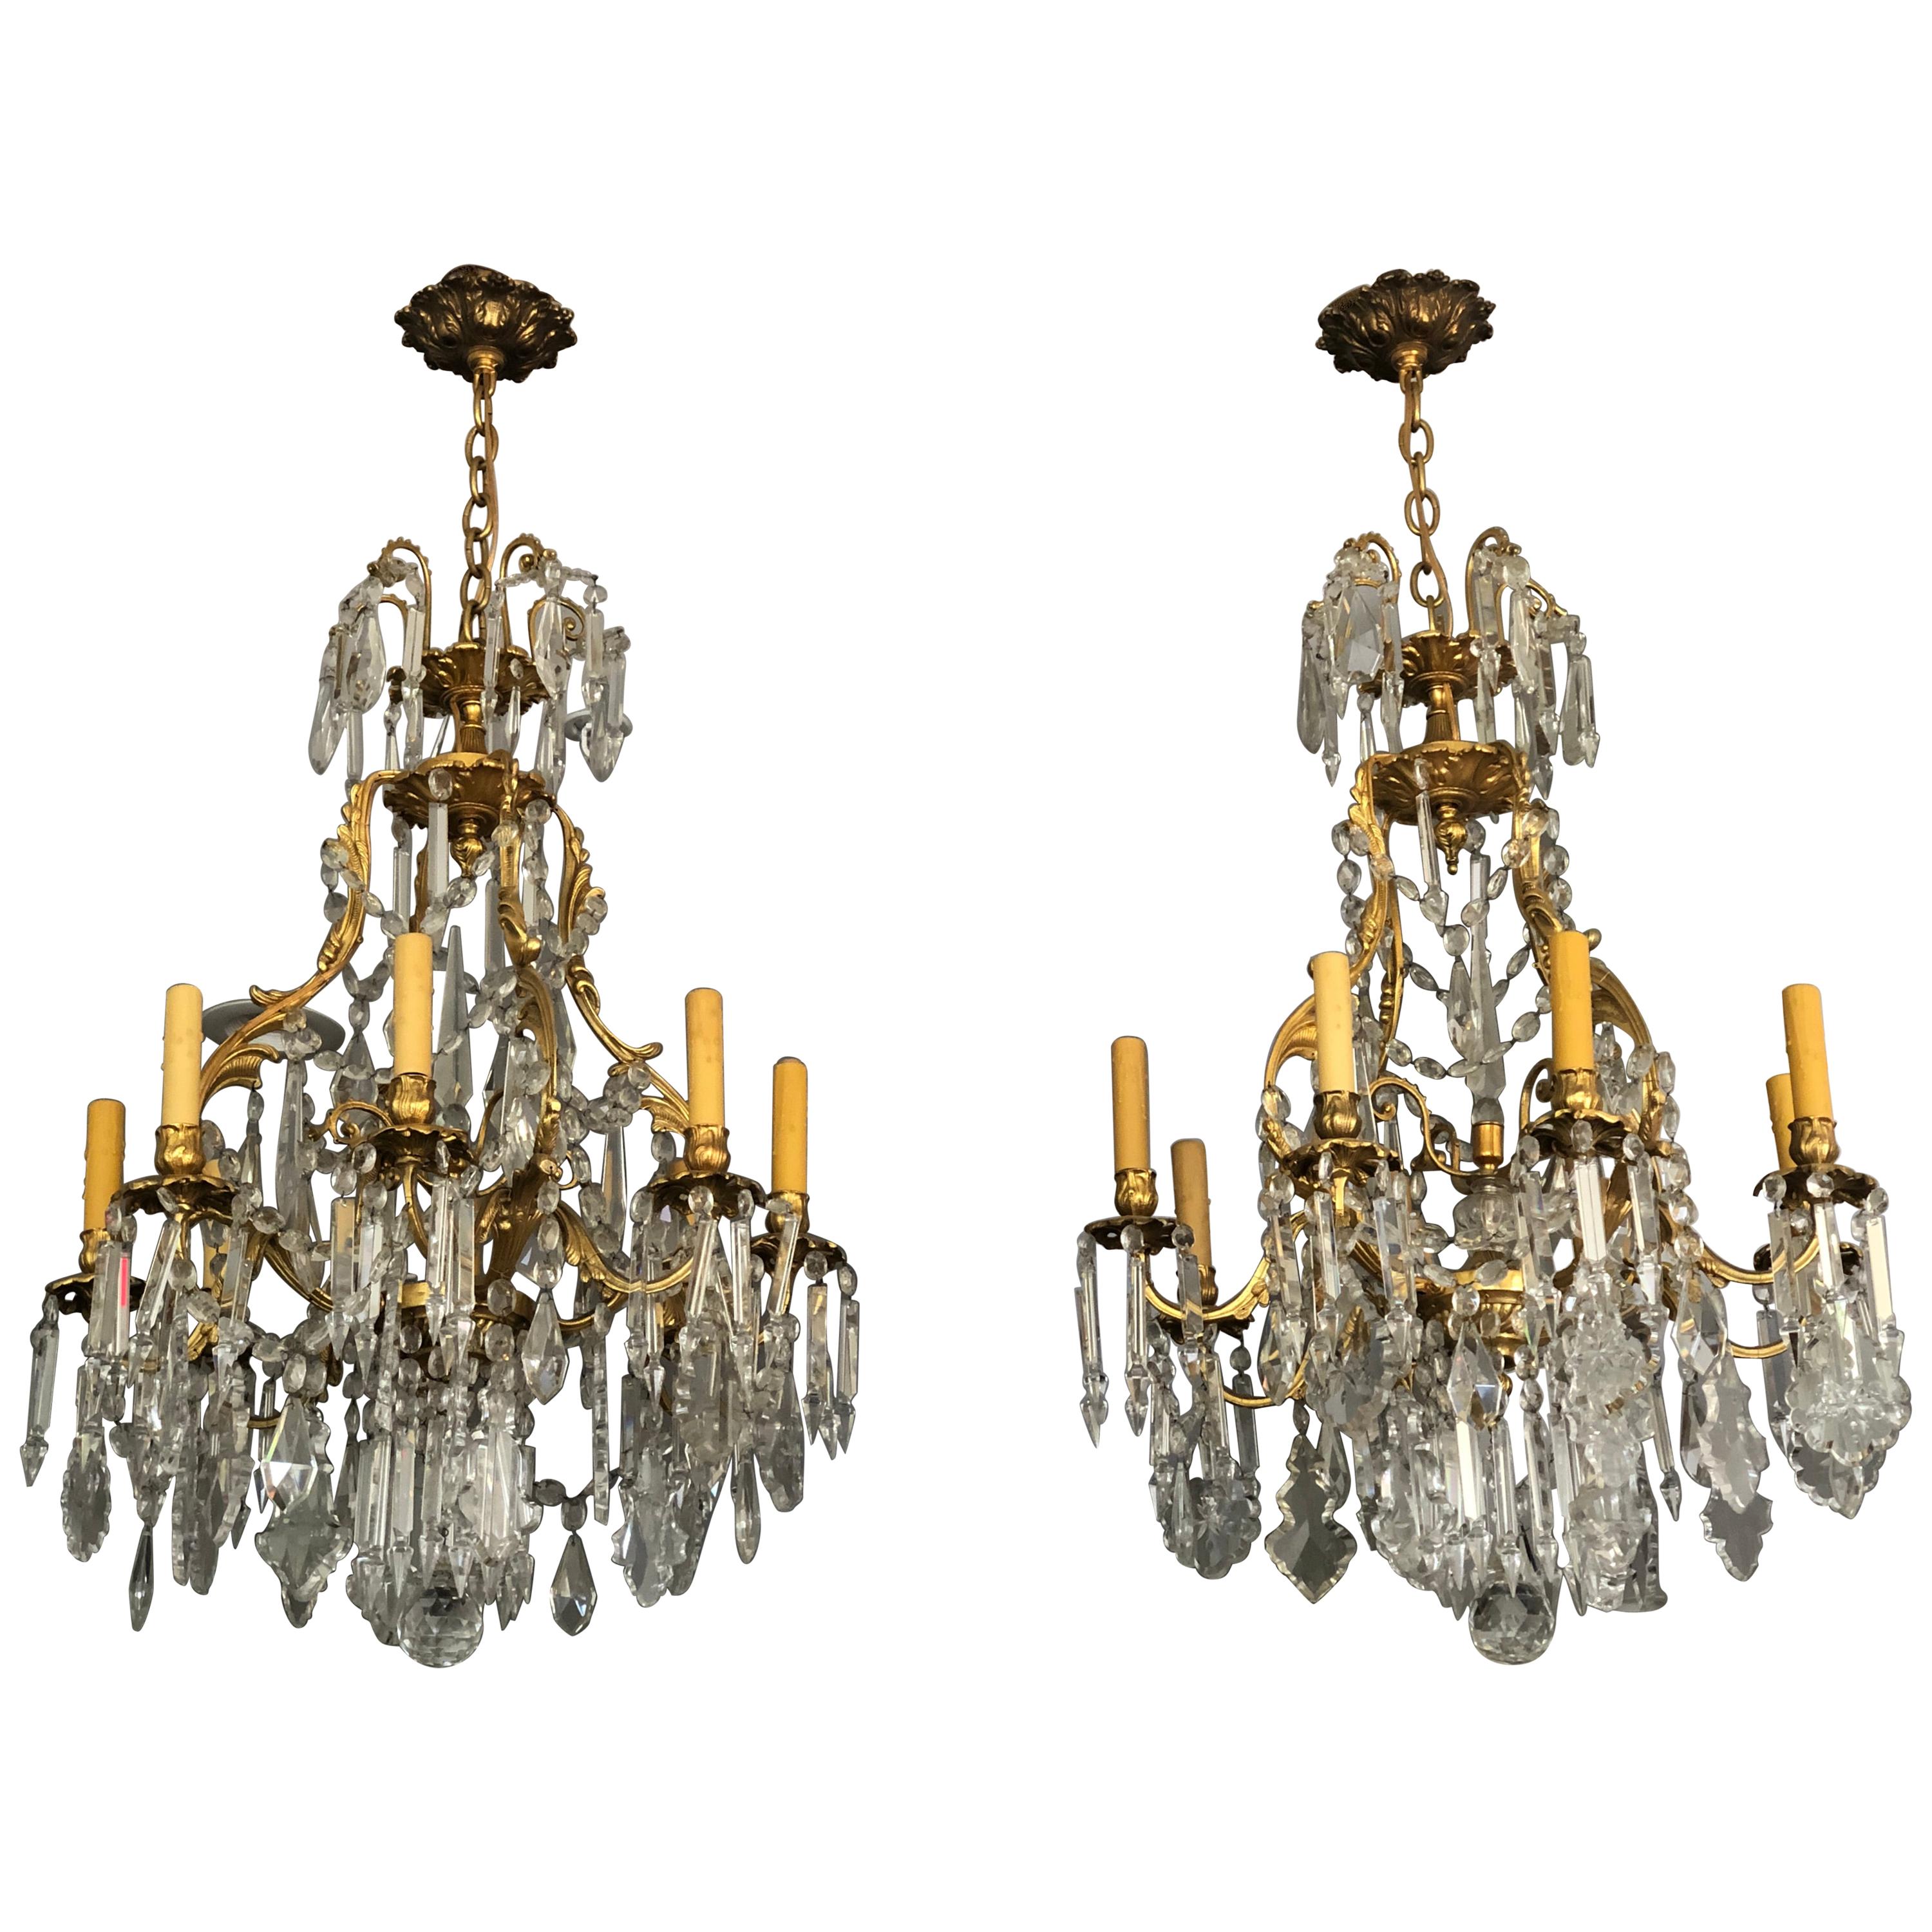 Pair Of Gilt Bronze and Crystal 19th Century Louis XV Chandeliers 